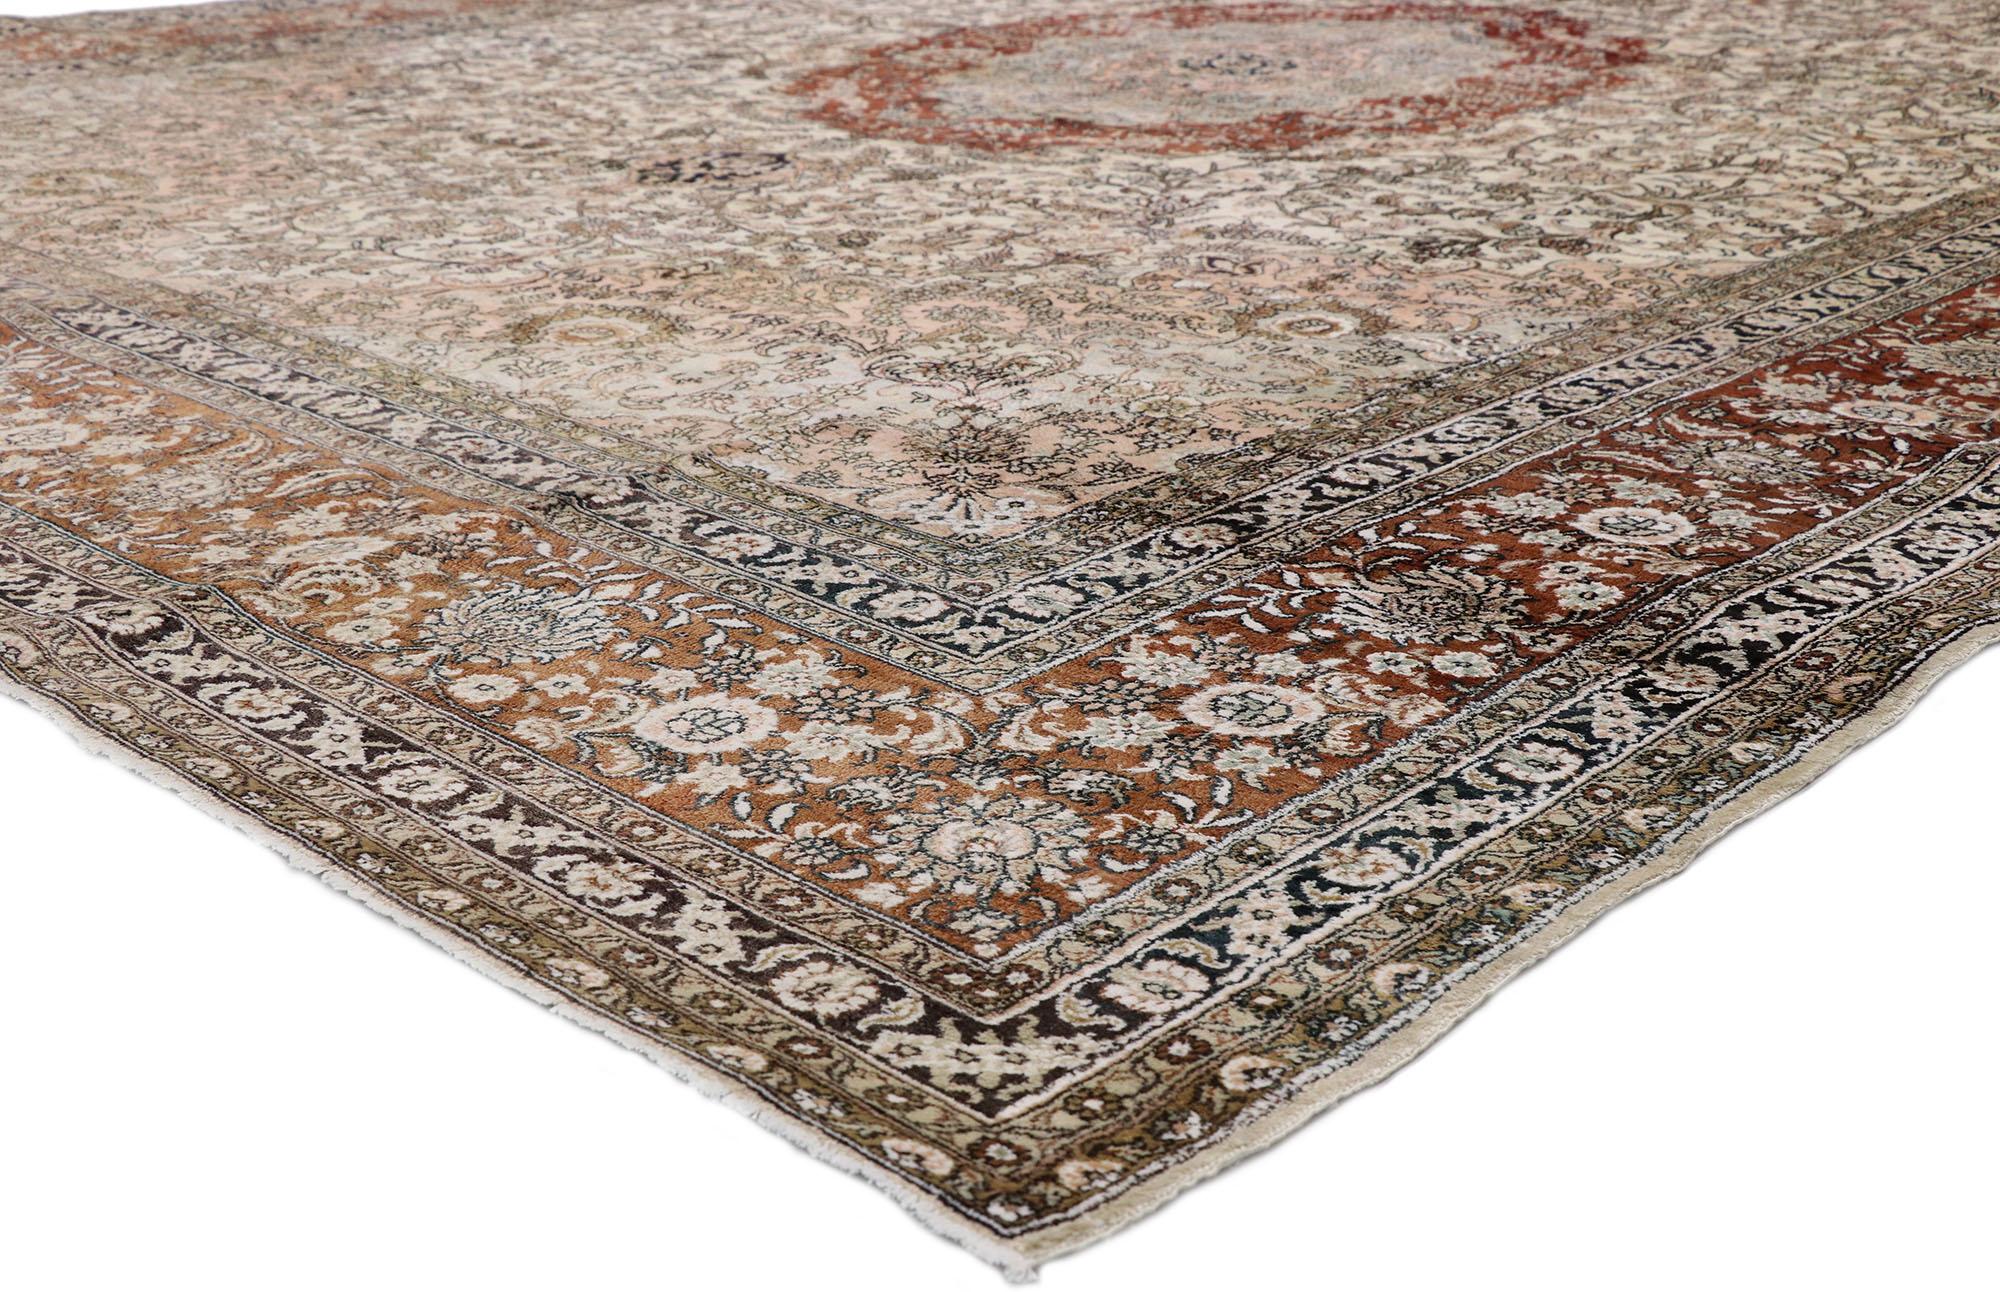 77376, vintage Persian Tabriz Chinese silk rug with Art Nouveau Rococo style. With ornate details and well-balanced symmetry combined with a dreamy color palette, this hand knotted wool vintage Persian Tabriz Chinese silk rug beautifully embodies